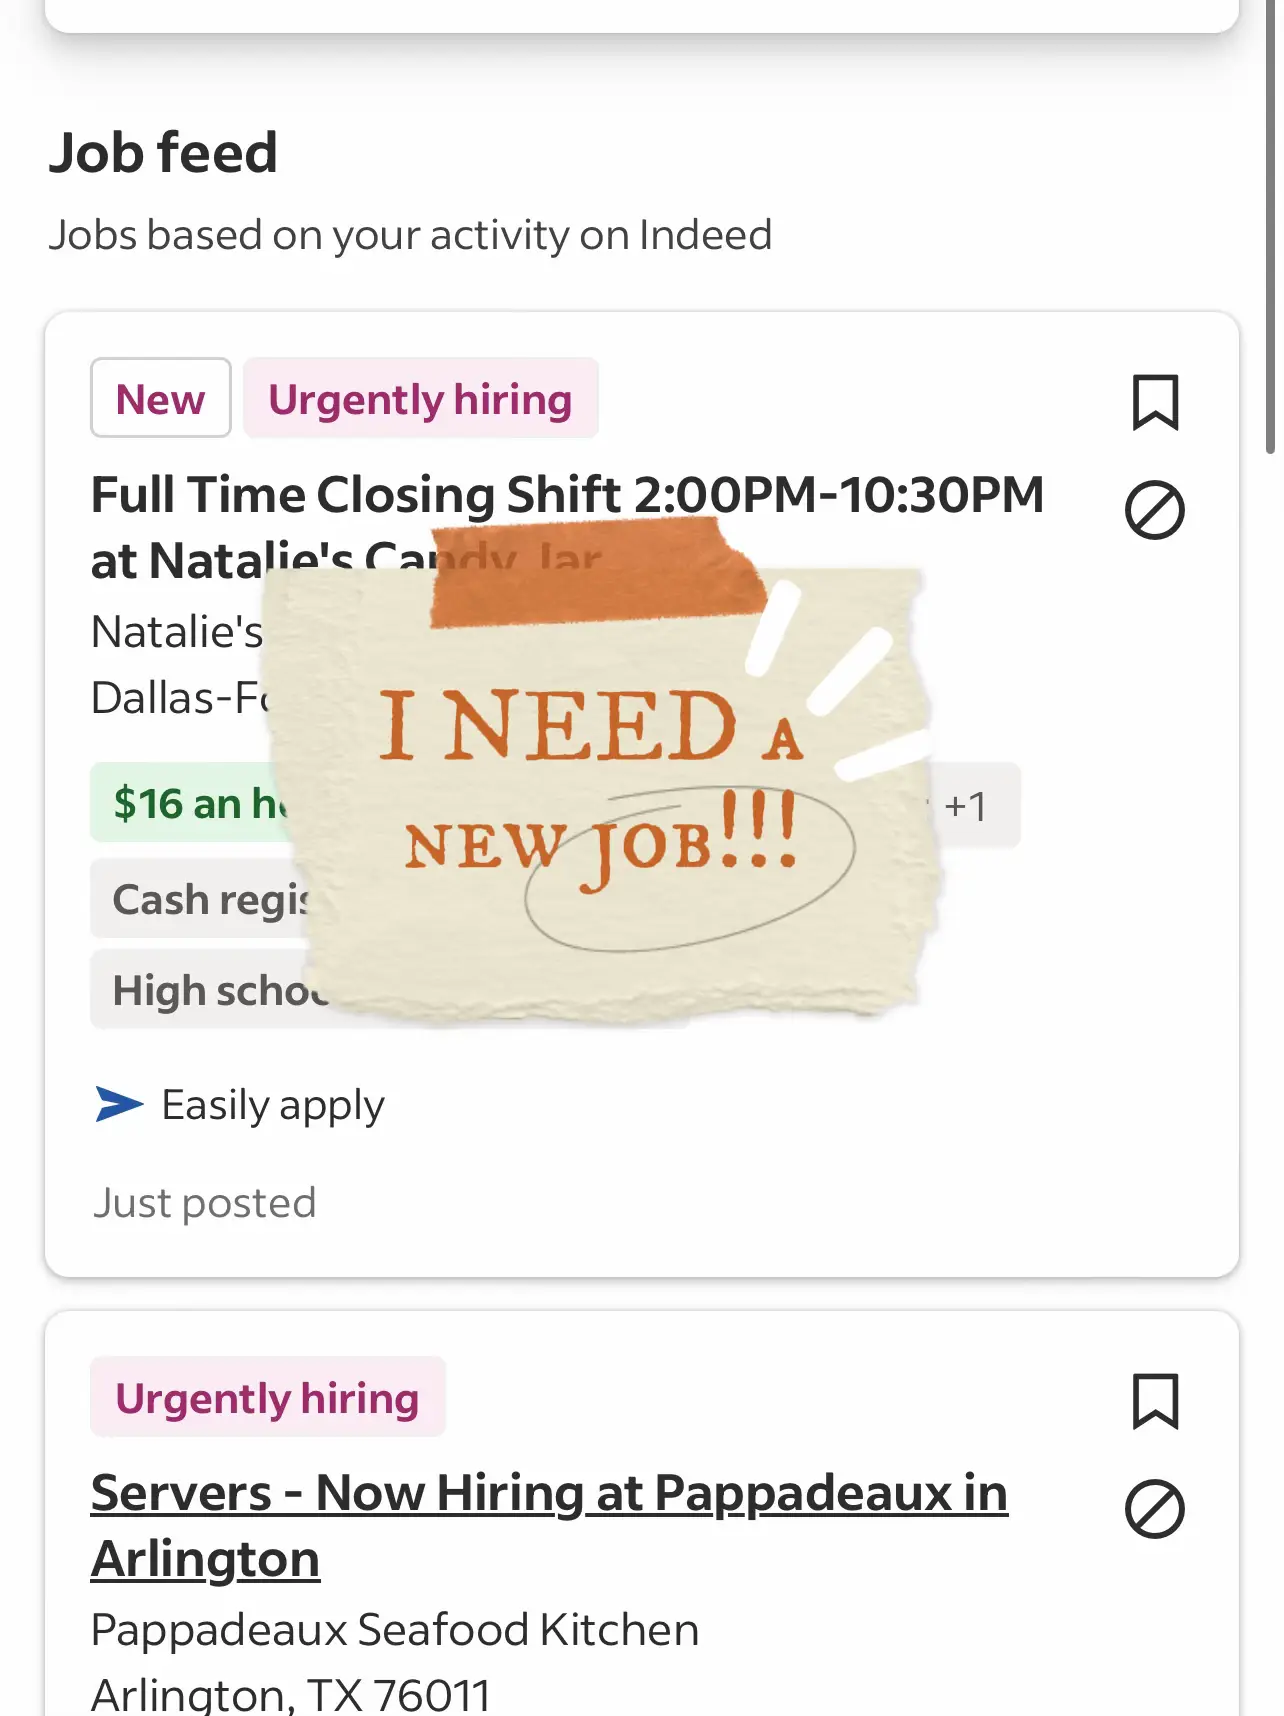  A list of jobs based on your activity on Indeed.